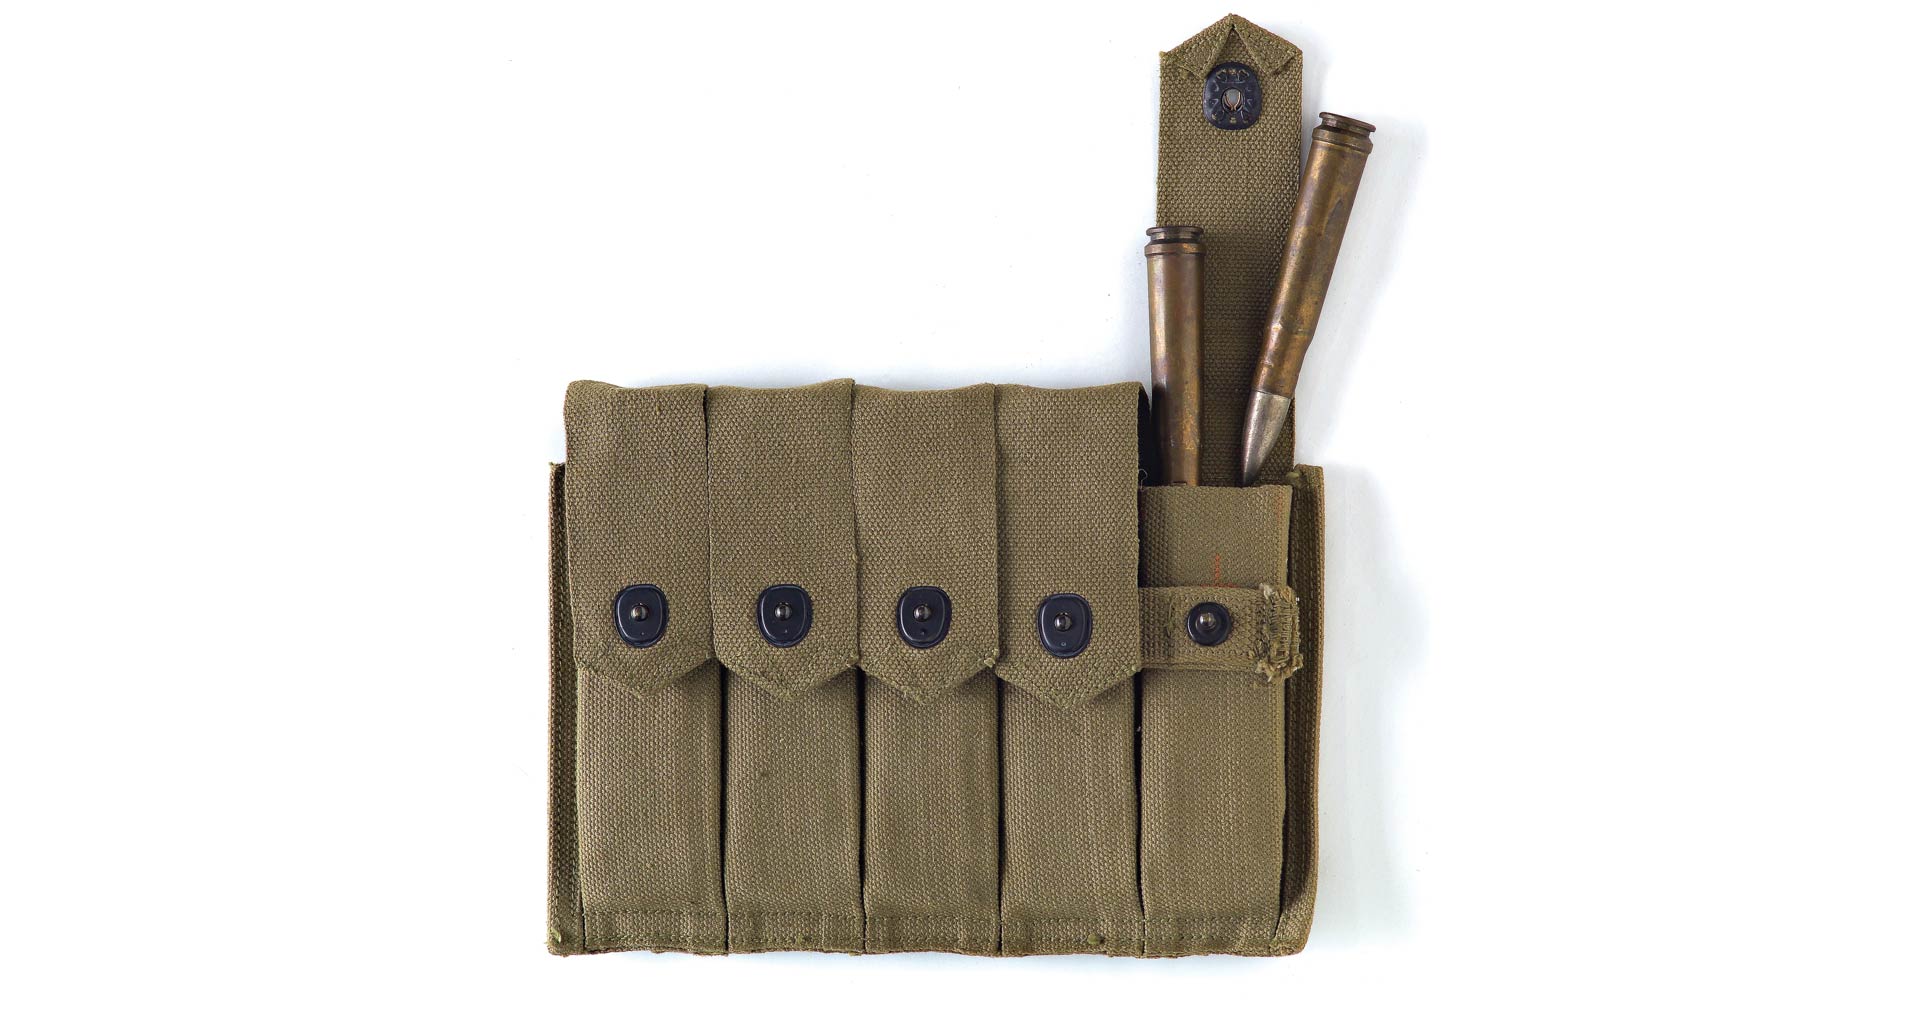 It has been reported that Marine Raiders carried .55 Boys rounds in submachine gun pouches. Two fit nicely in each cell